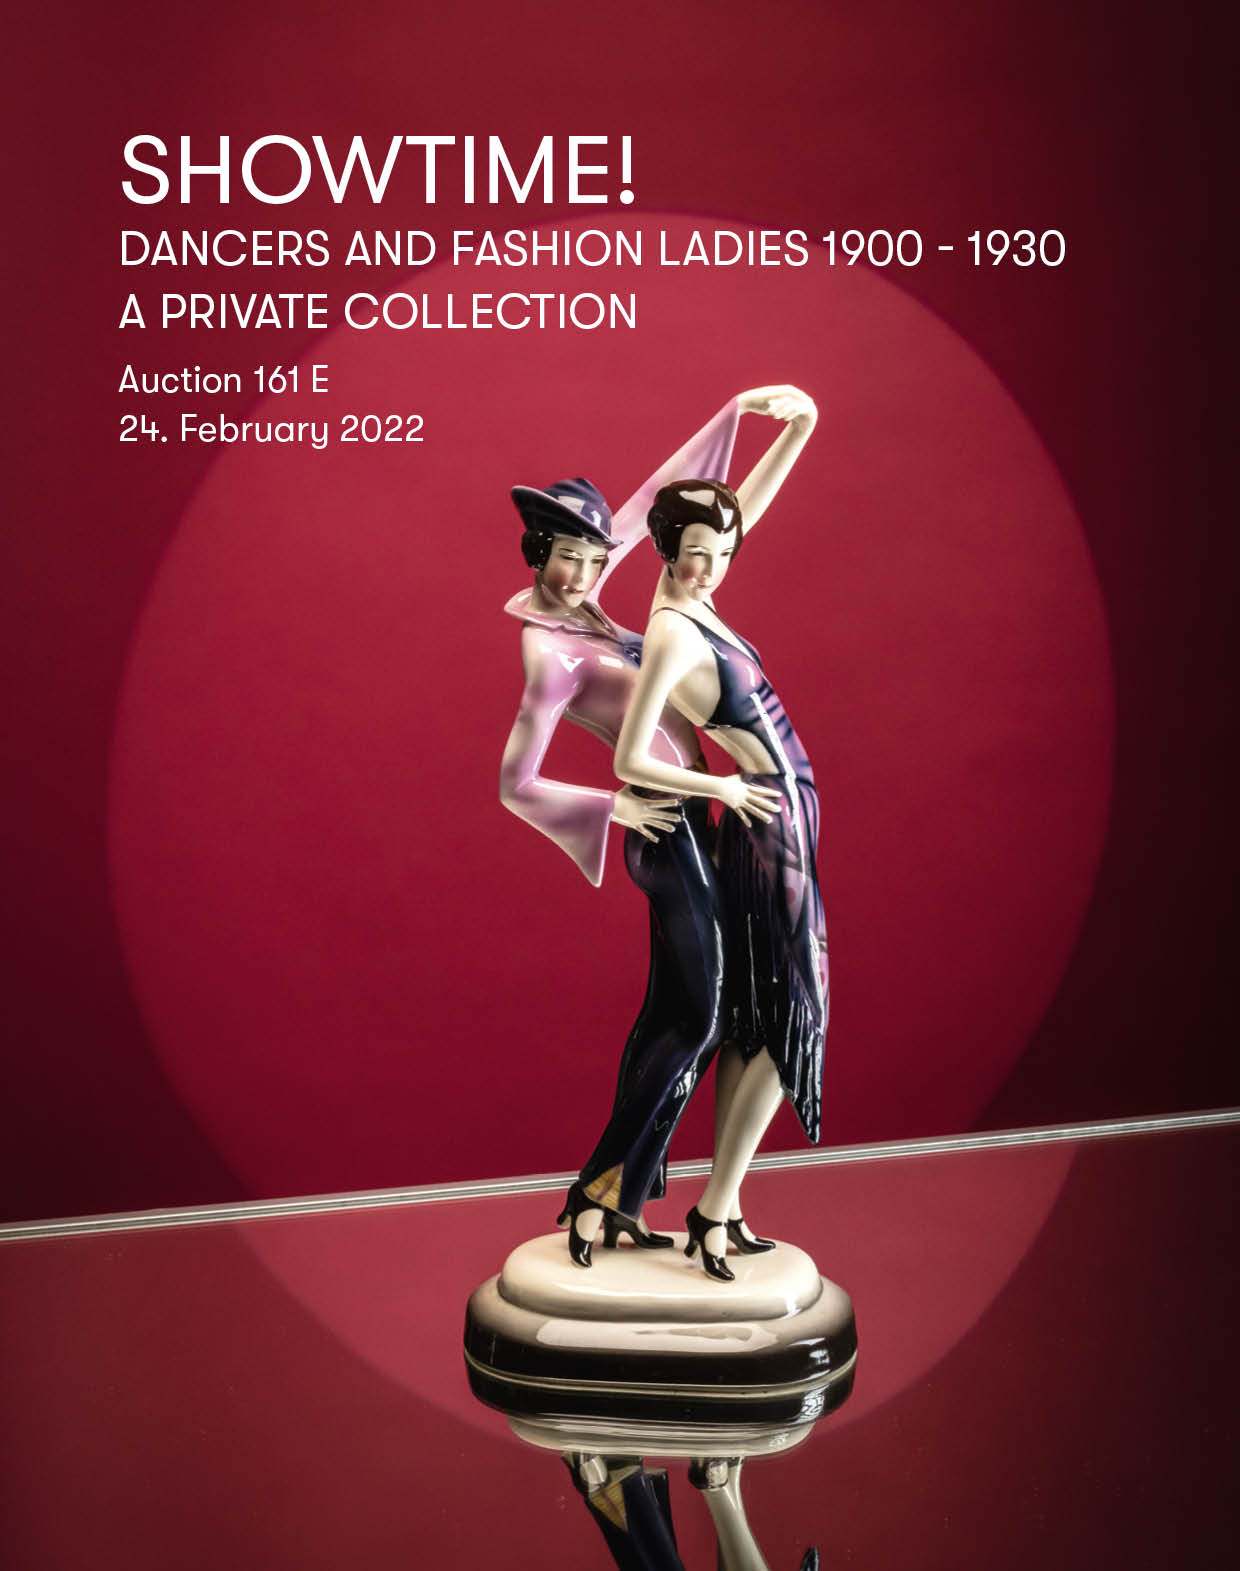 Showtime! Dancers and Fashion Ladies 1900 - 1930